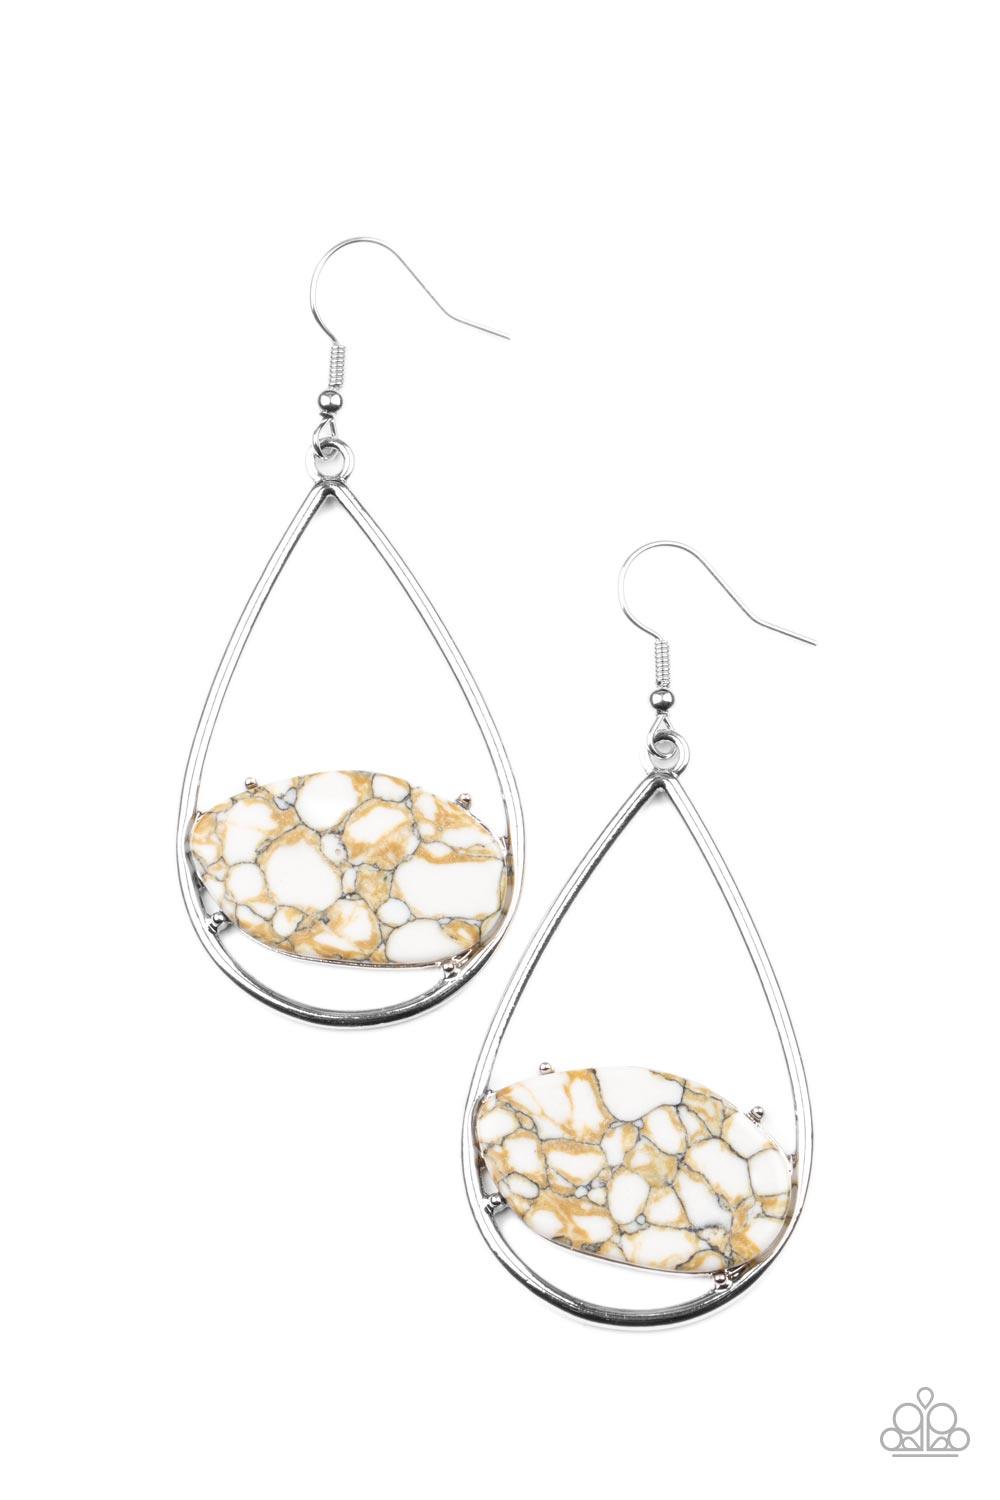 Paparazzi Accessories Tropical Terrazzo - White Featuring a colorful terrazzo-like finish, an earthy oval stone is nestled inside the bottom of an airy silver teardrop for a modern look. Earring attaches to a standard fishhook fitting. Sold as one pair of